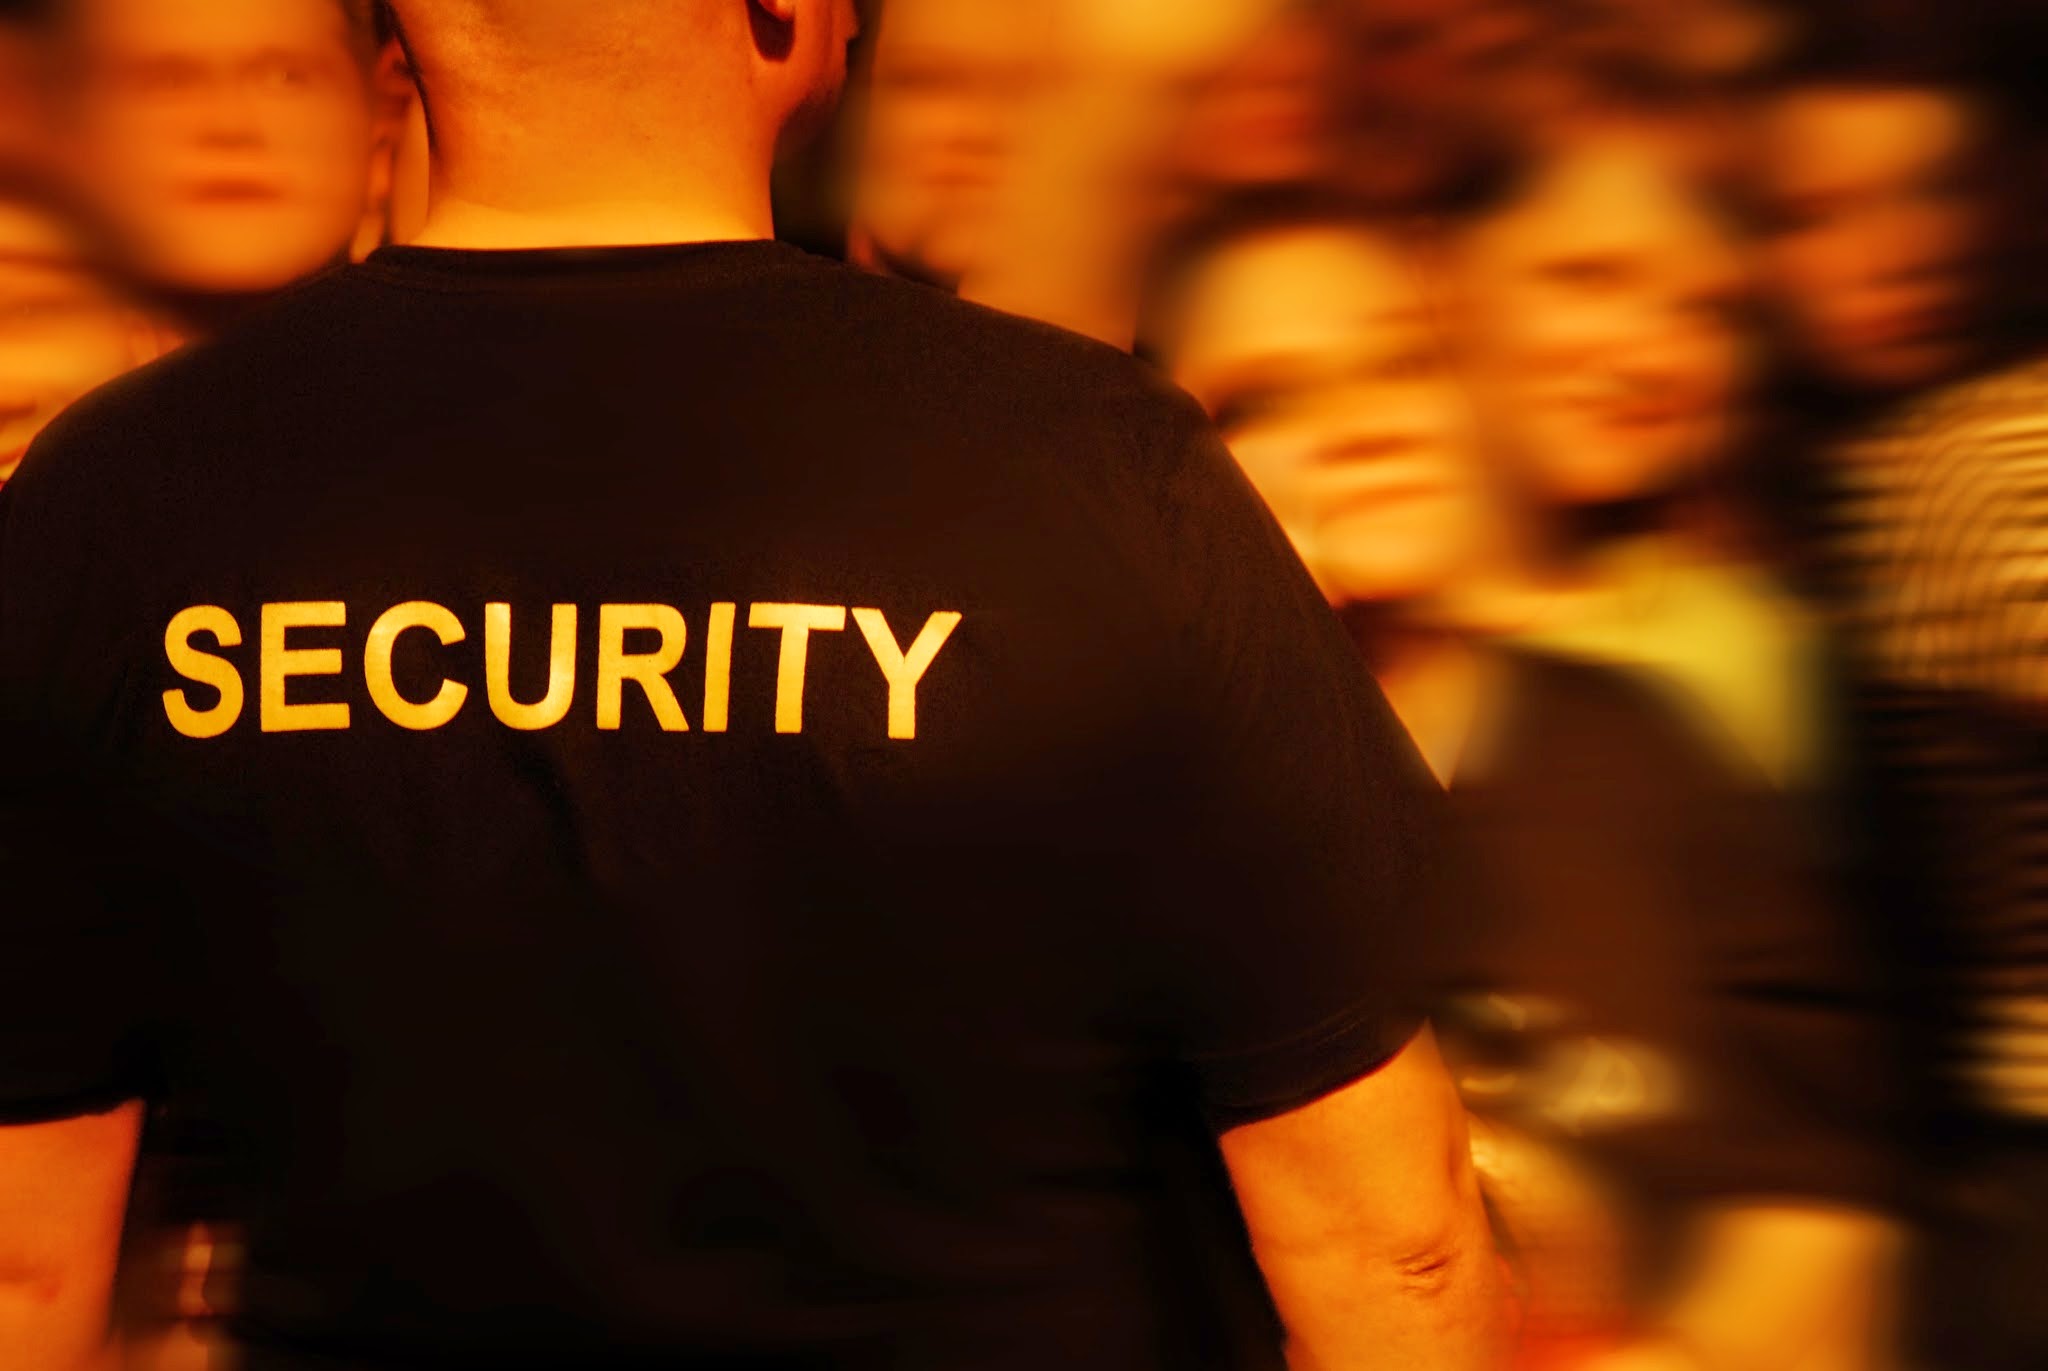 Concert security summit calls for new global standard to protect acts, music fans